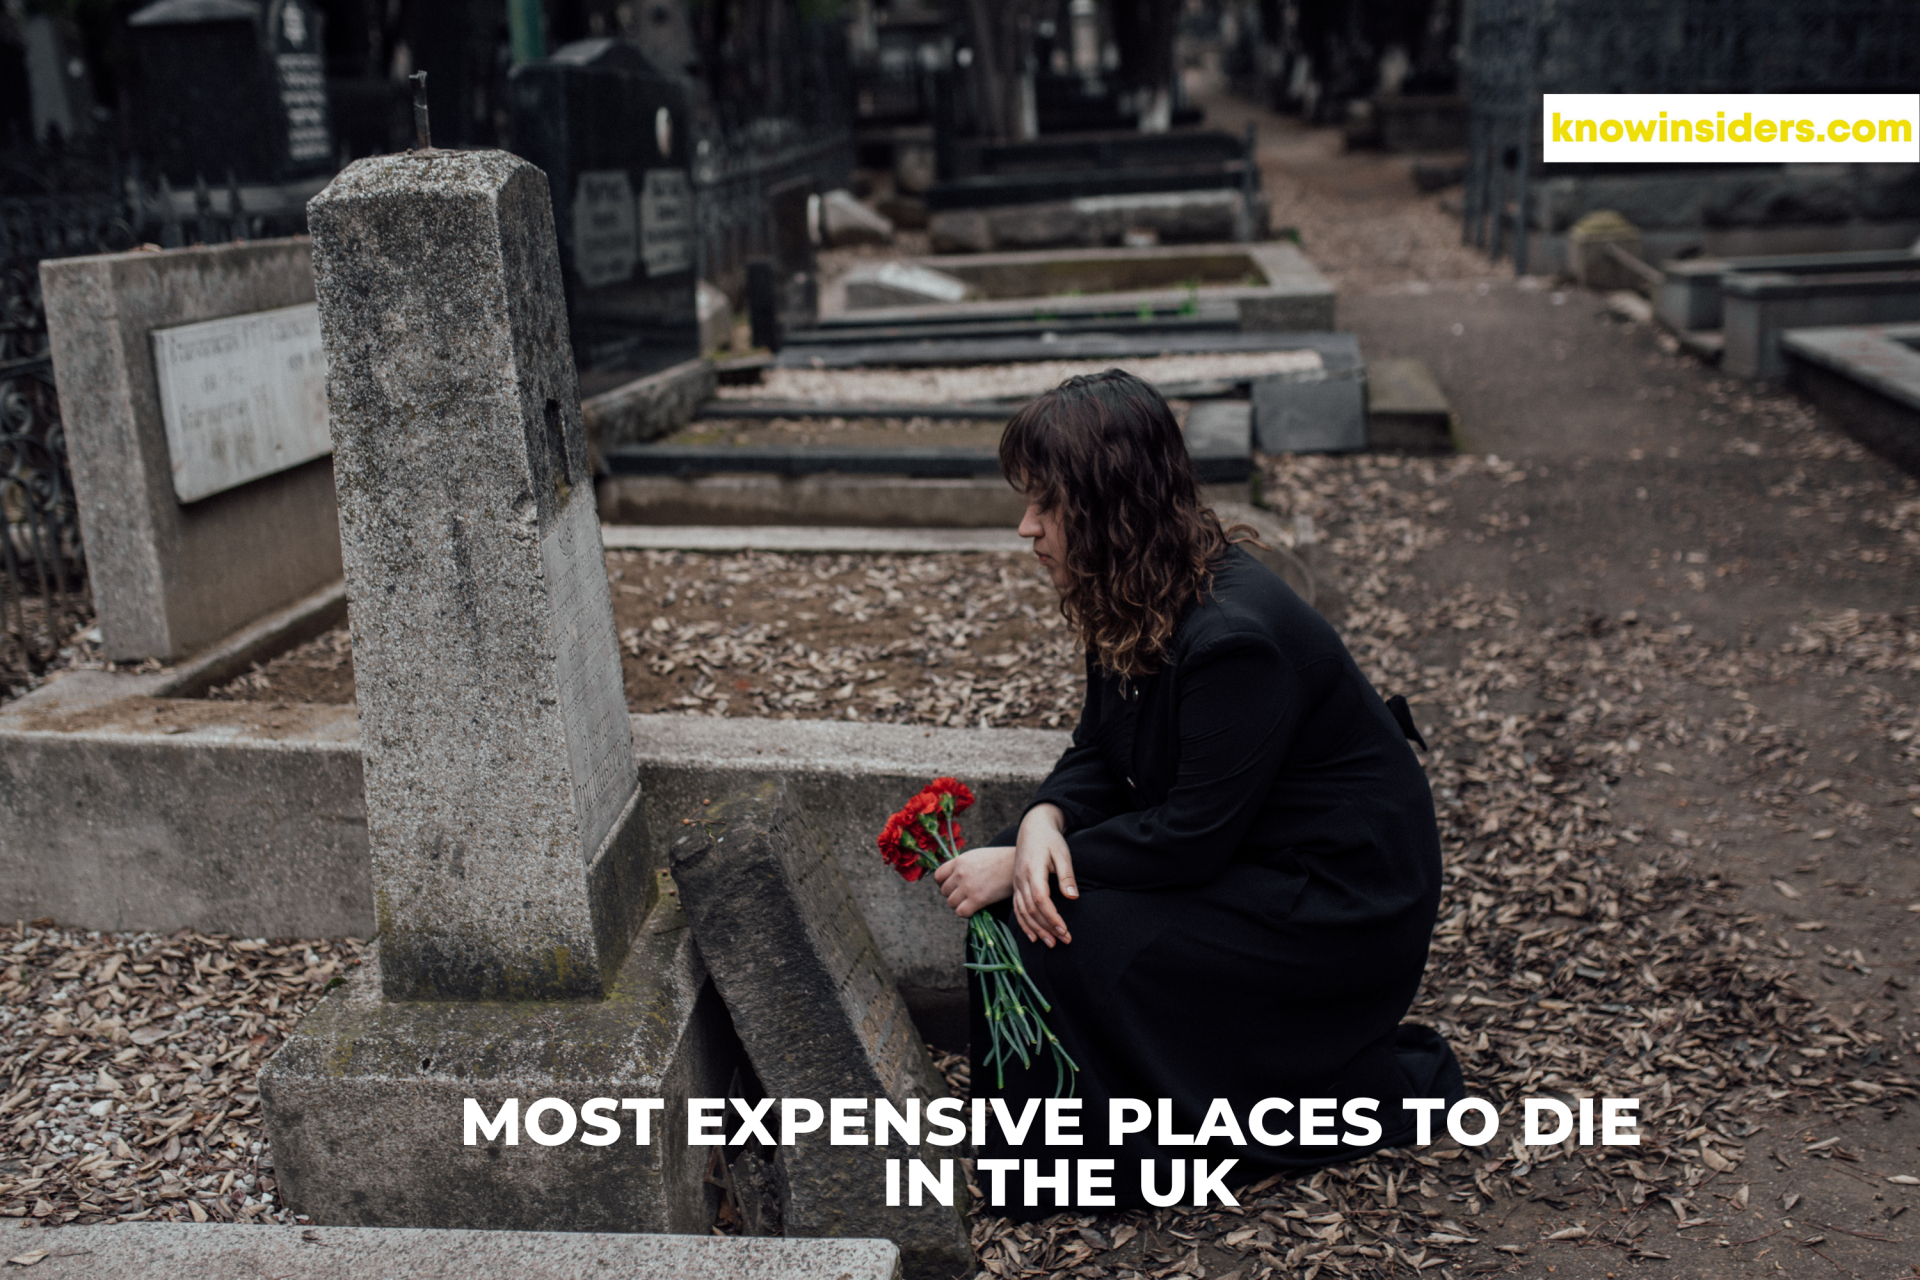 Funeral Costs In The UK: 10 Most Expensive Places To Die